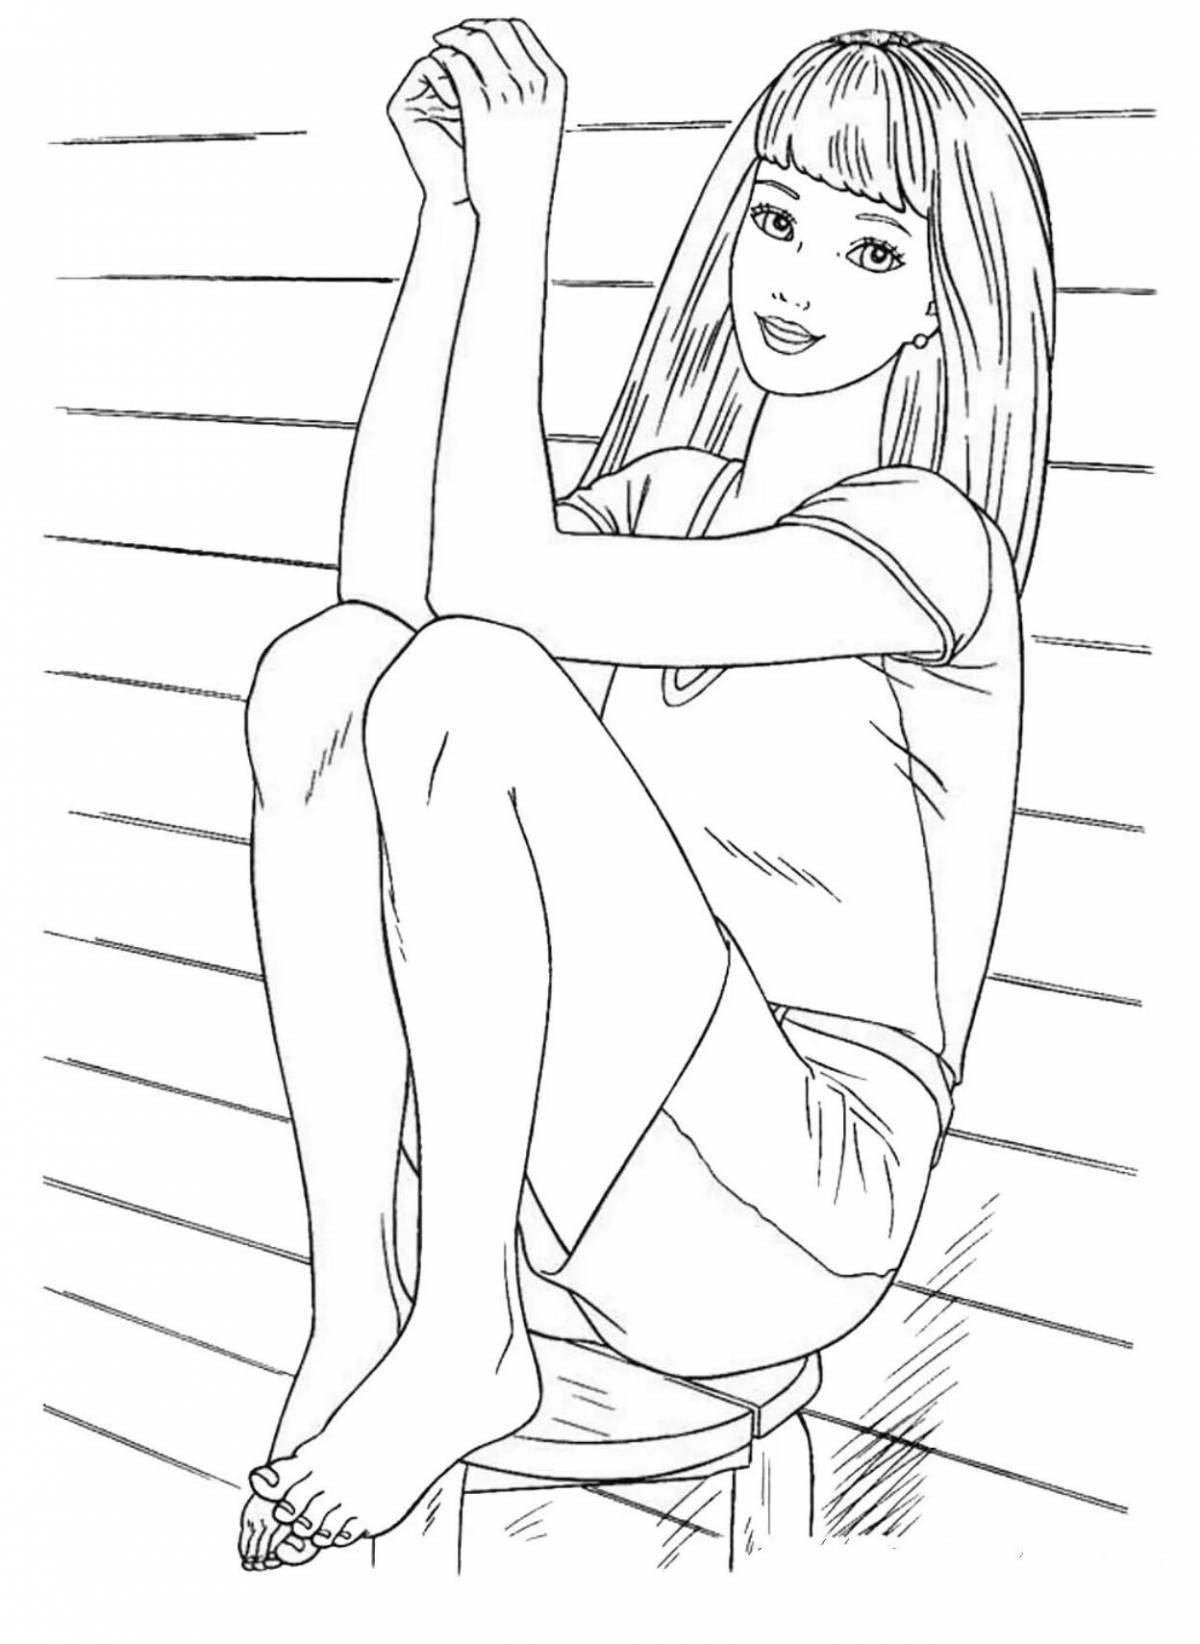 Dazzling coloring page 16 for girls